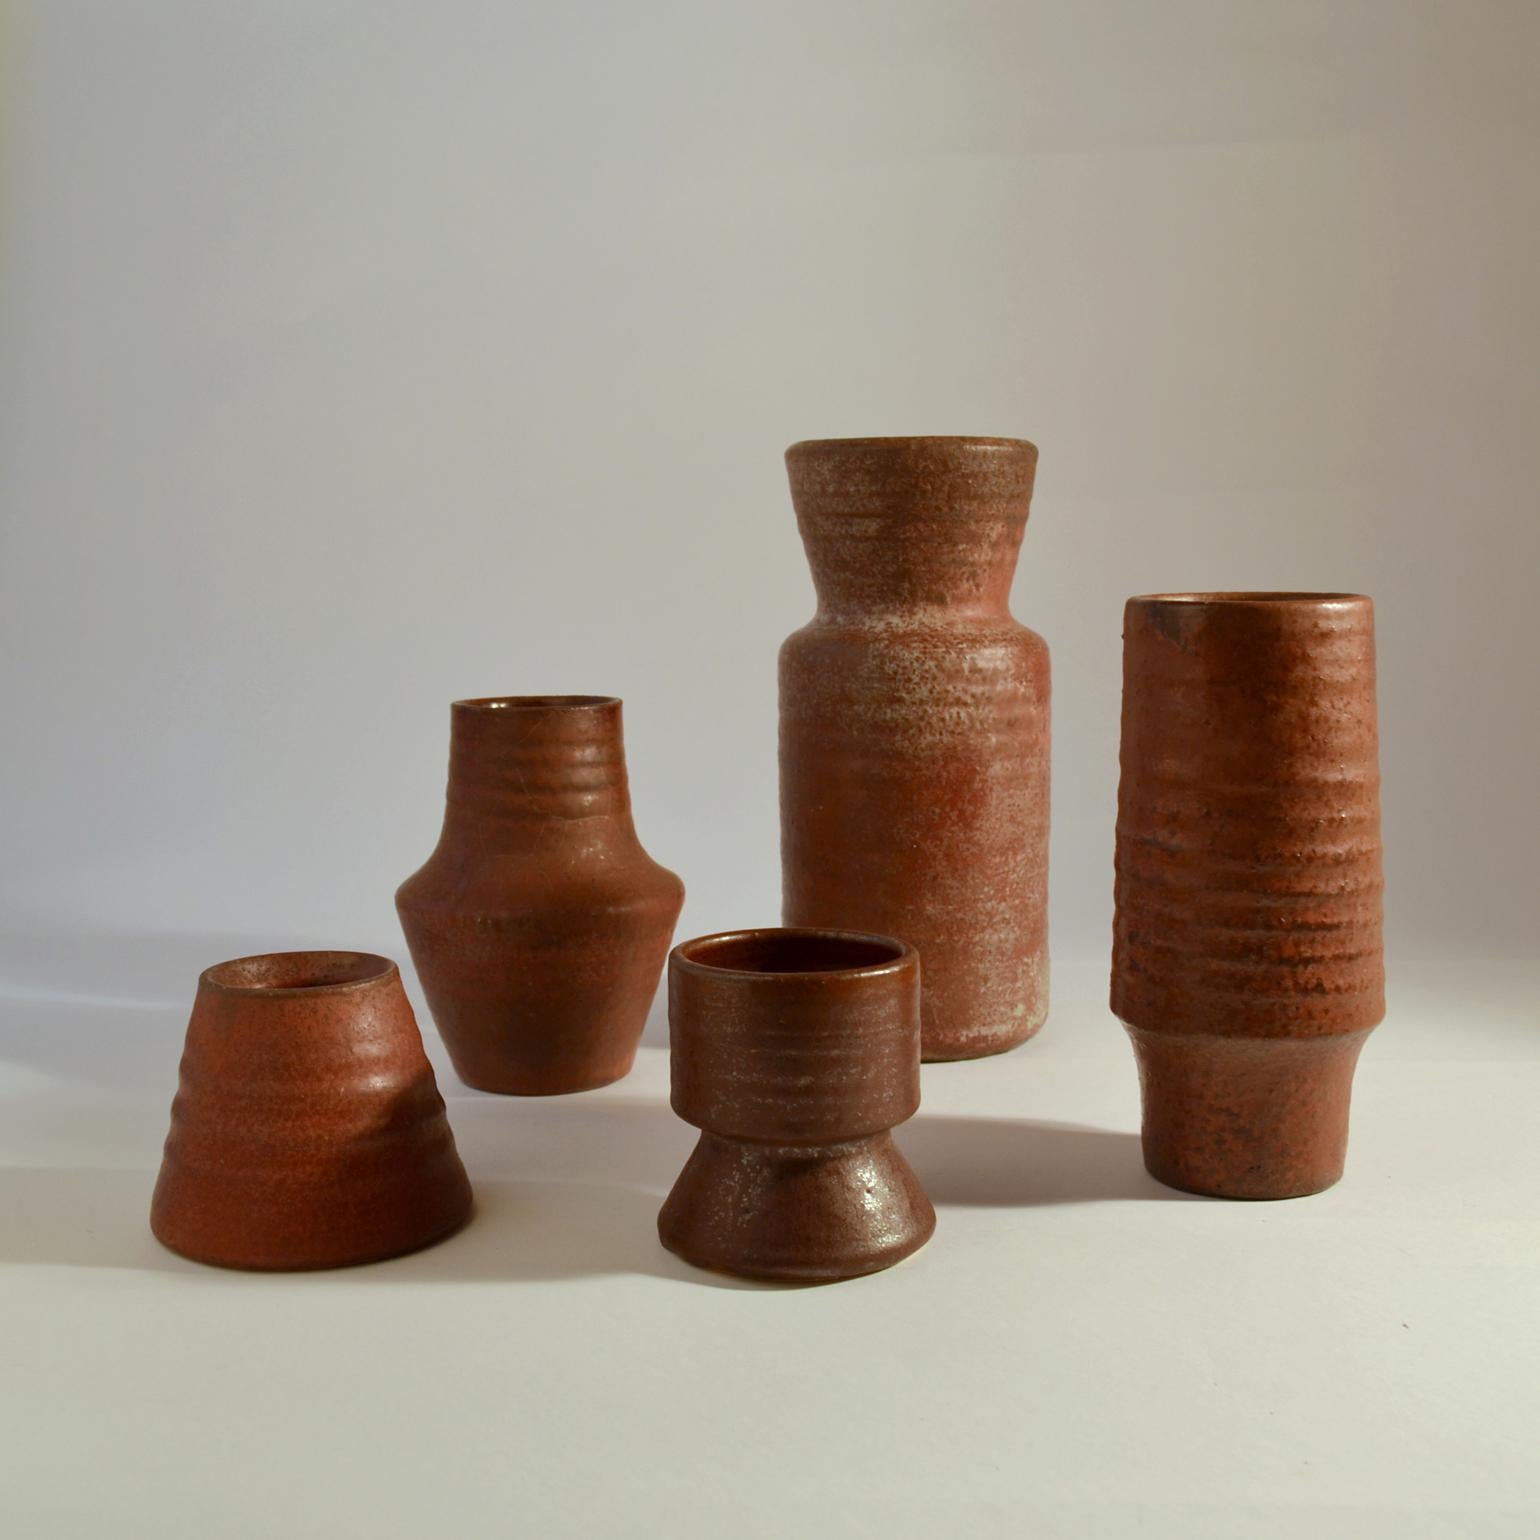 Five studio pottery vases of various heights in red tones and in compatible forms. They are like sculptures with a natural rough character created on the turning wheel by highly technical skilled Dutch ceramist in the 1960s . The glazes made of